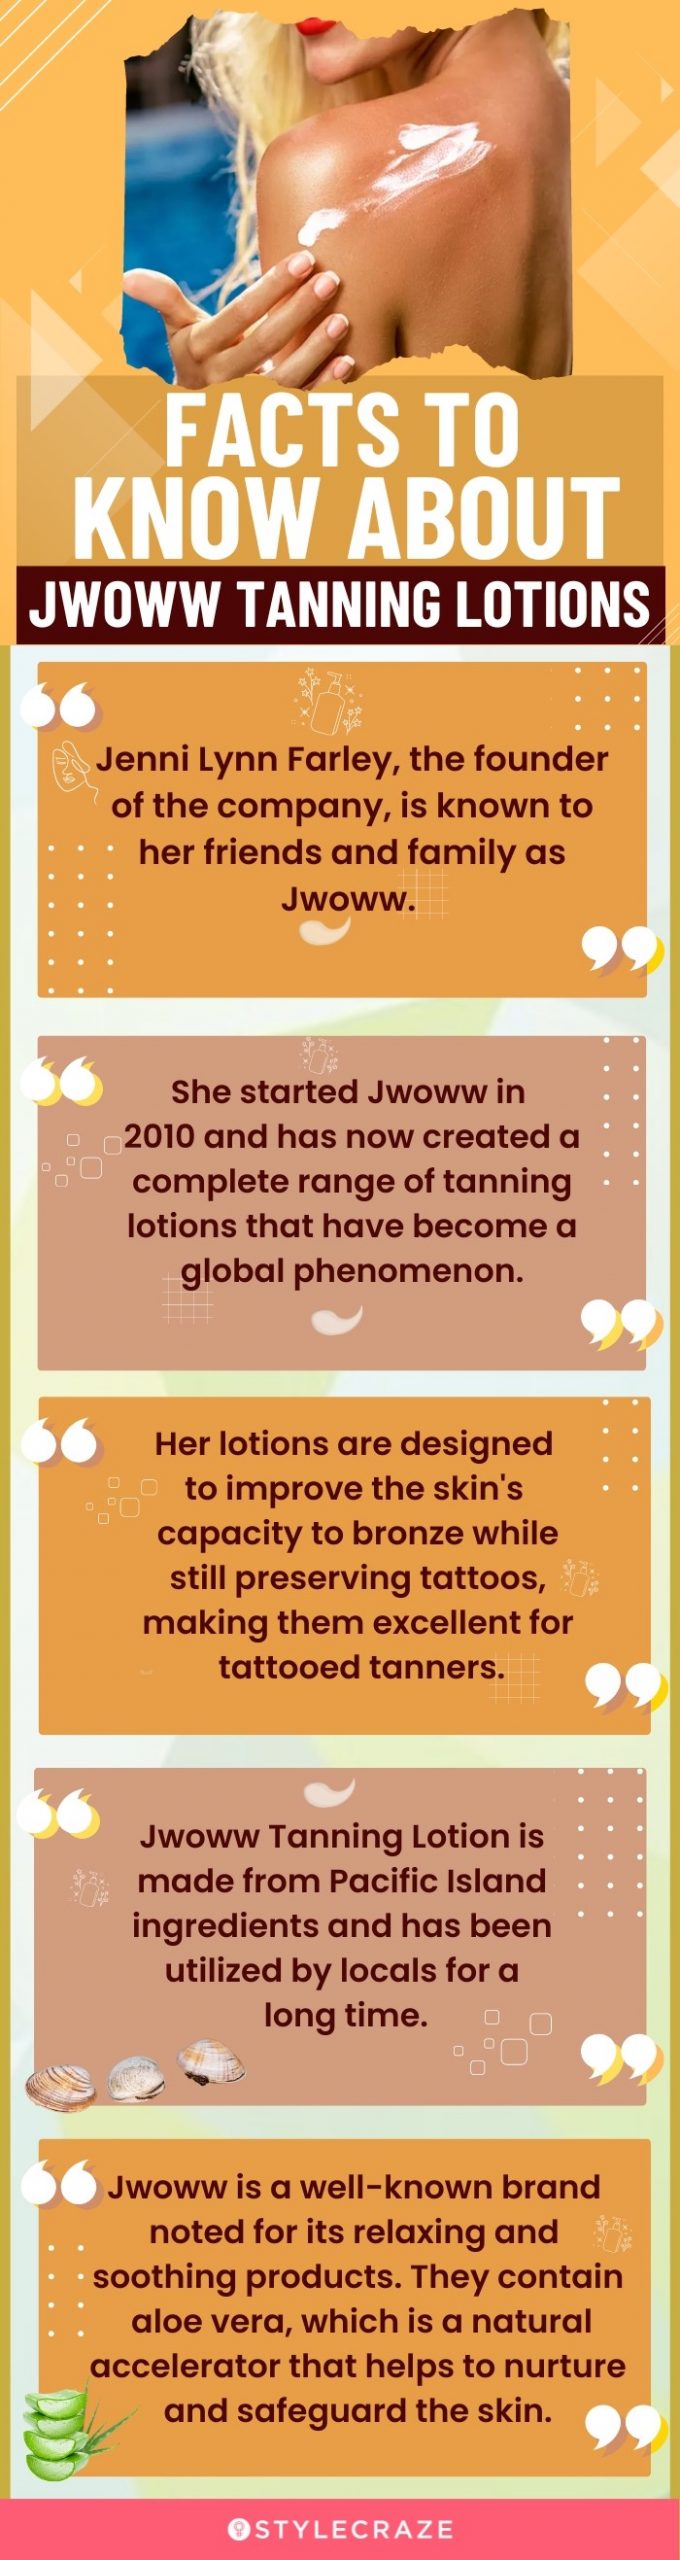 Facts To Know About Jwoww Tanning Lotions (infographic)